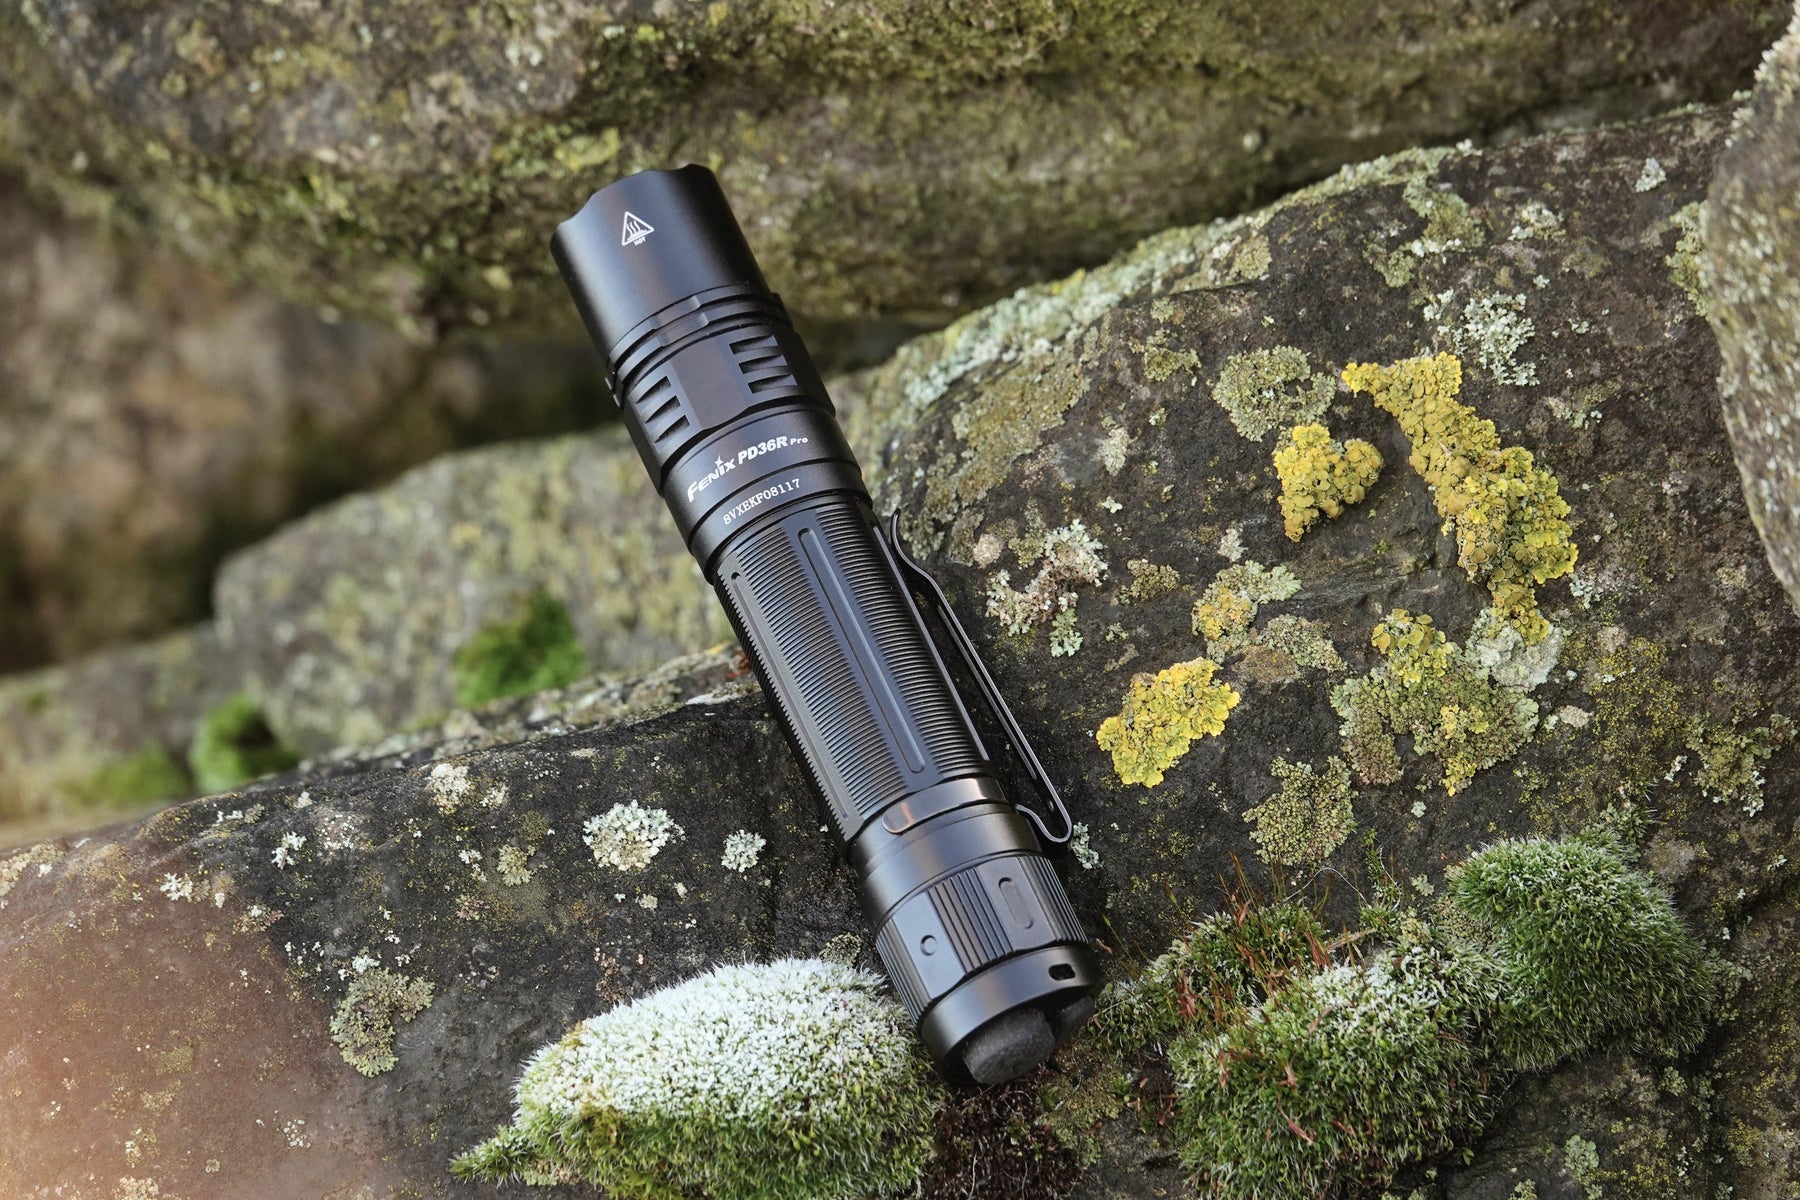 Choosing the Ultimate Tactical Flashlight: A Comparative Analysis of Fenix's PD36R, PD36 Tac, and PD36R Pro